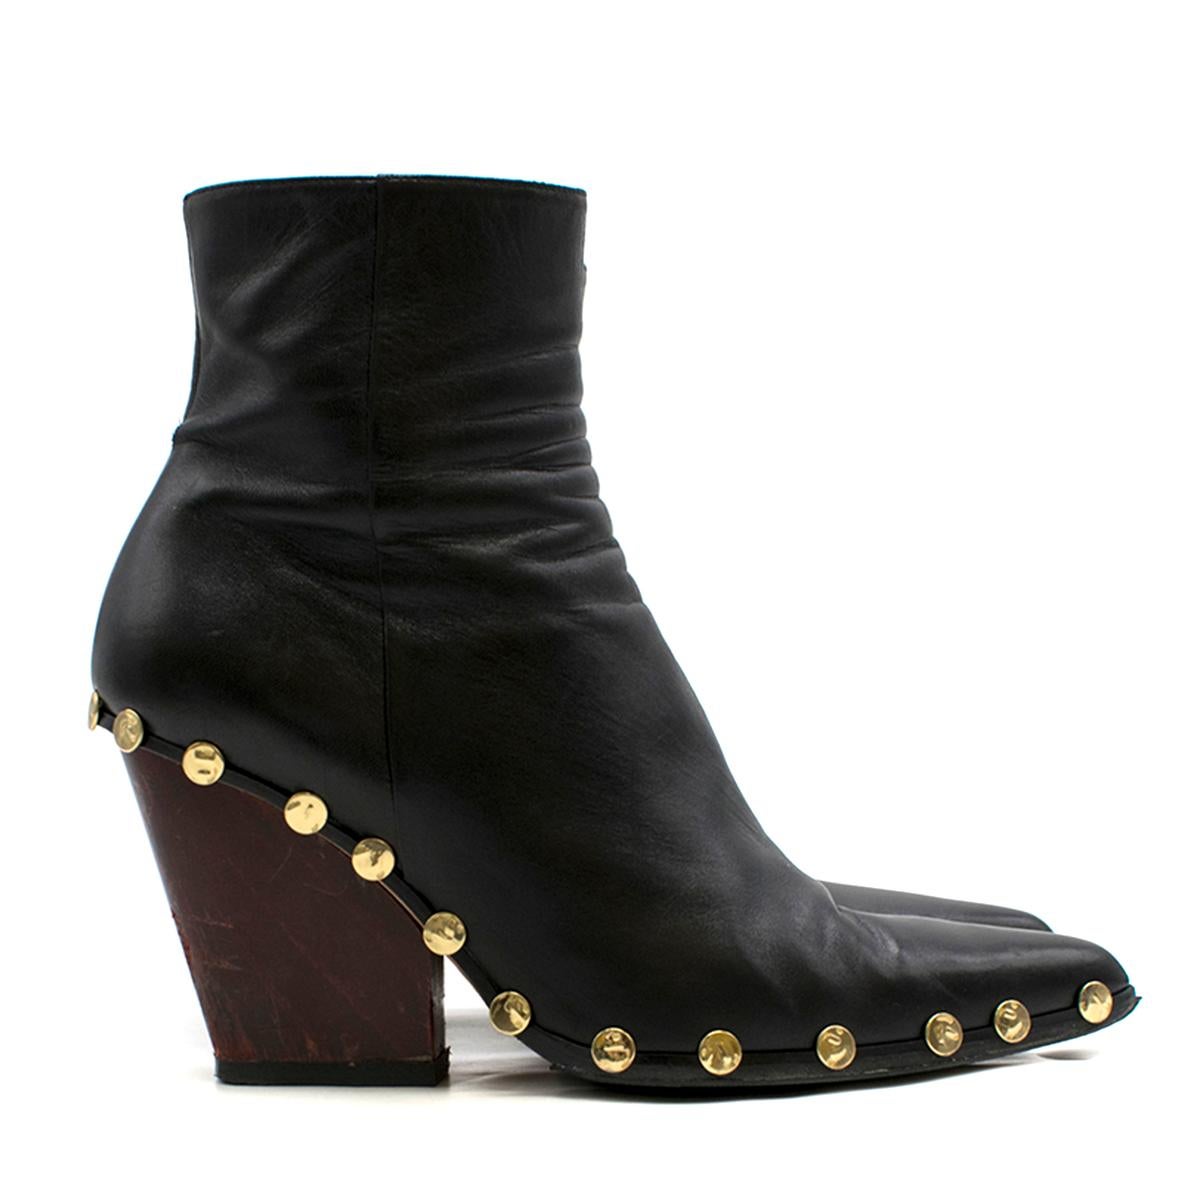 Celine Rodeo High Ankle Boot with Studs

- Smooth shiny black leather ankle boots
- Chunky red block heel
- Pointed toes
- Side zip fastening 
- Hammered gold-tone metal studded midsole trim 
- This item comes with an alternative brand dust